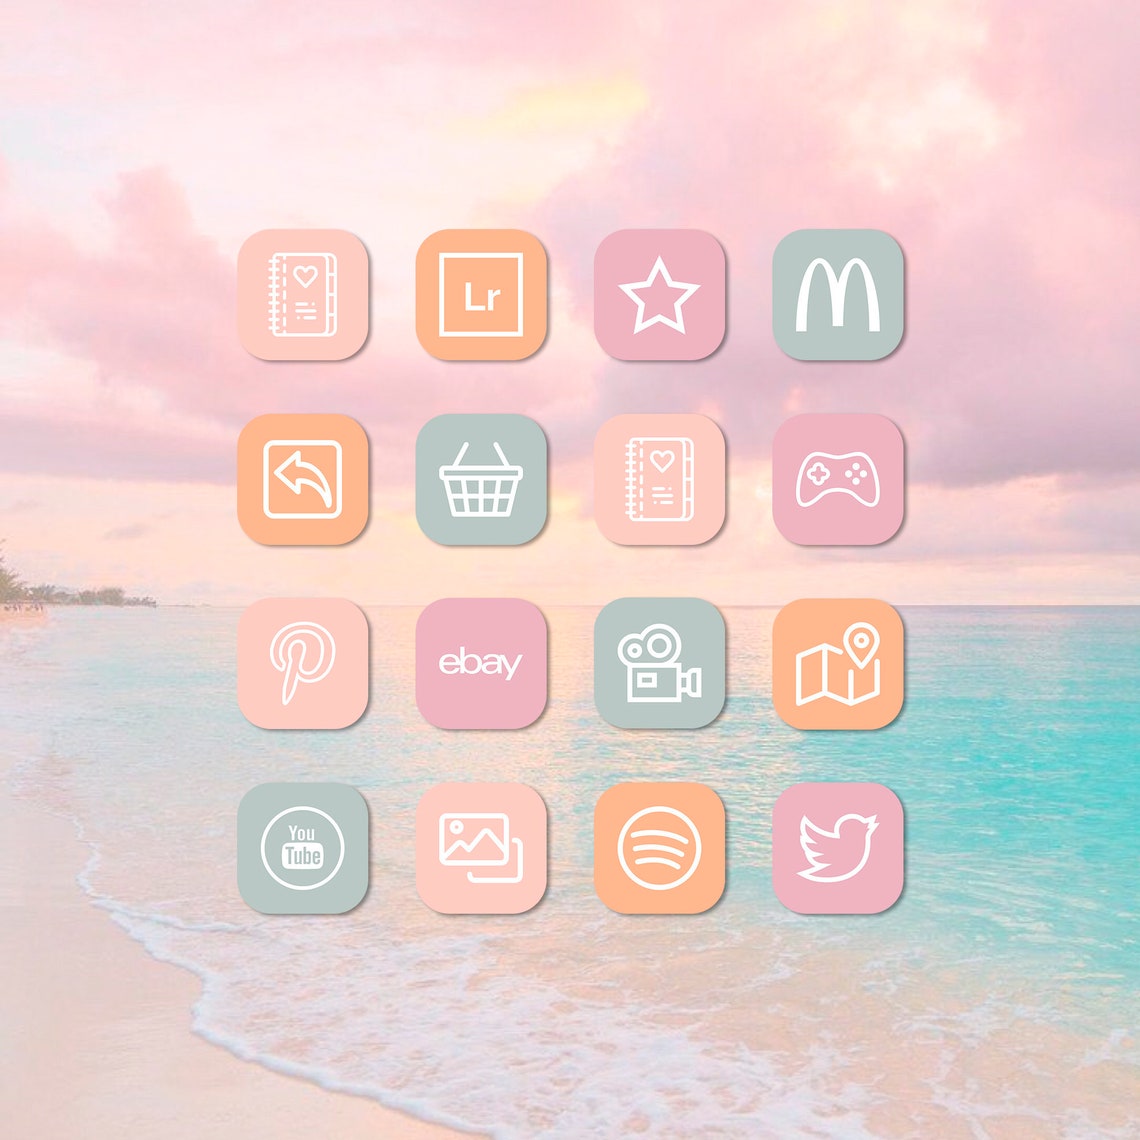 Beach vibes app icons whimsical pastels ios 14 app icons | Etsy